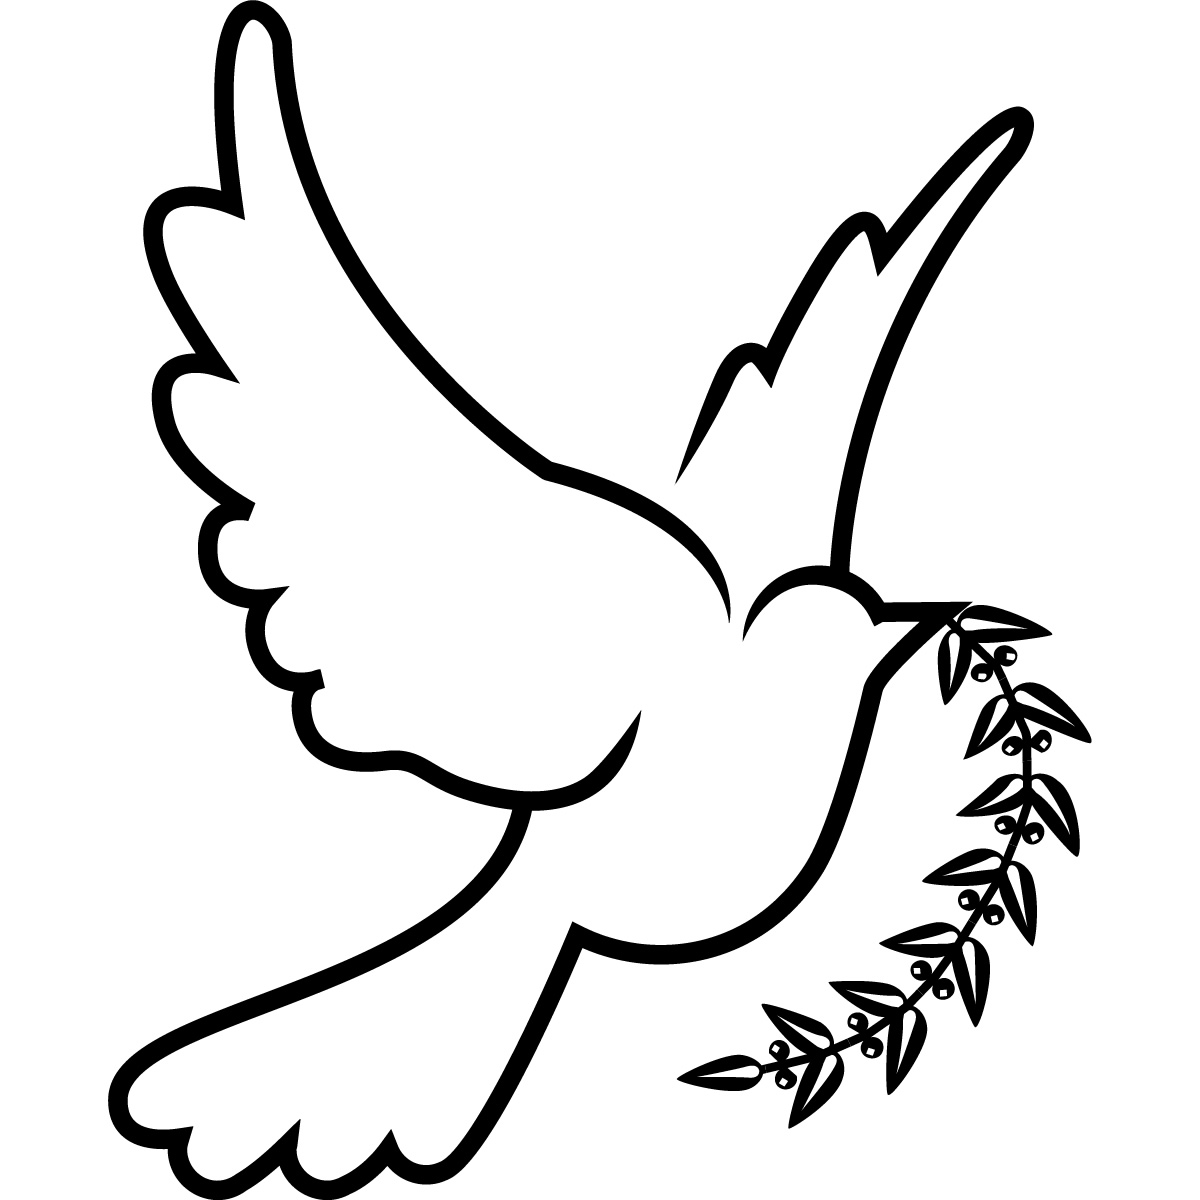 12 White Dove Drawing Free Cliparts That You Can Download To You